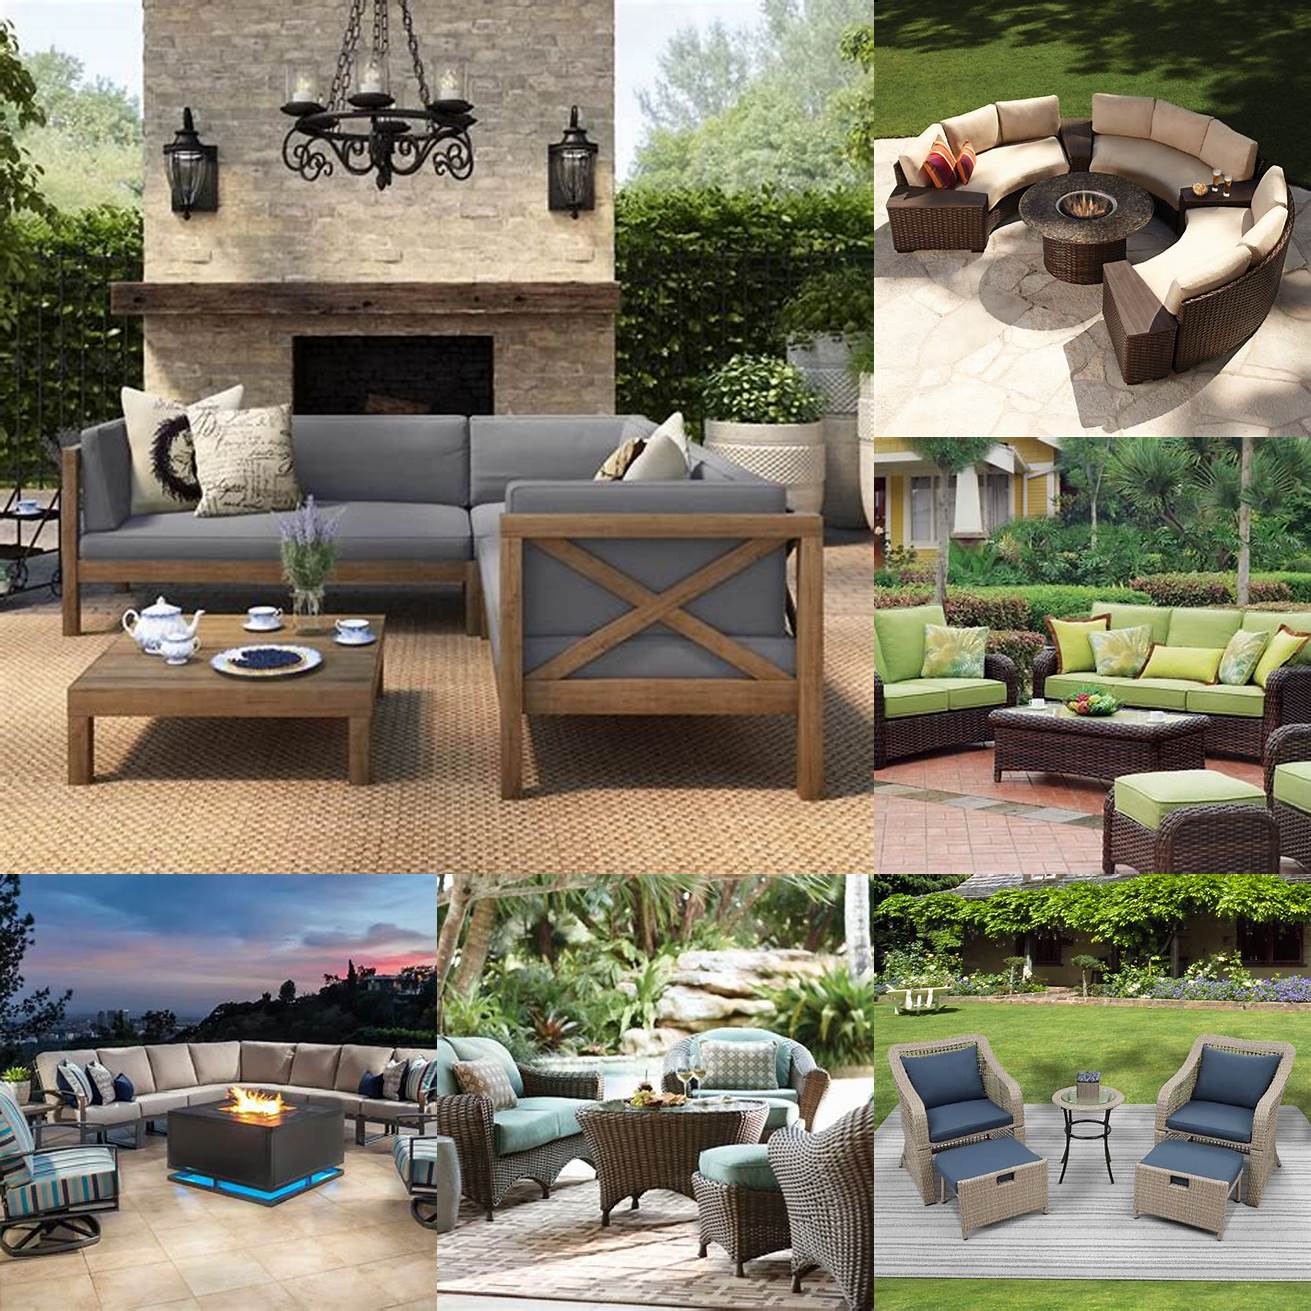 Go to the Patio Living website and login to your account